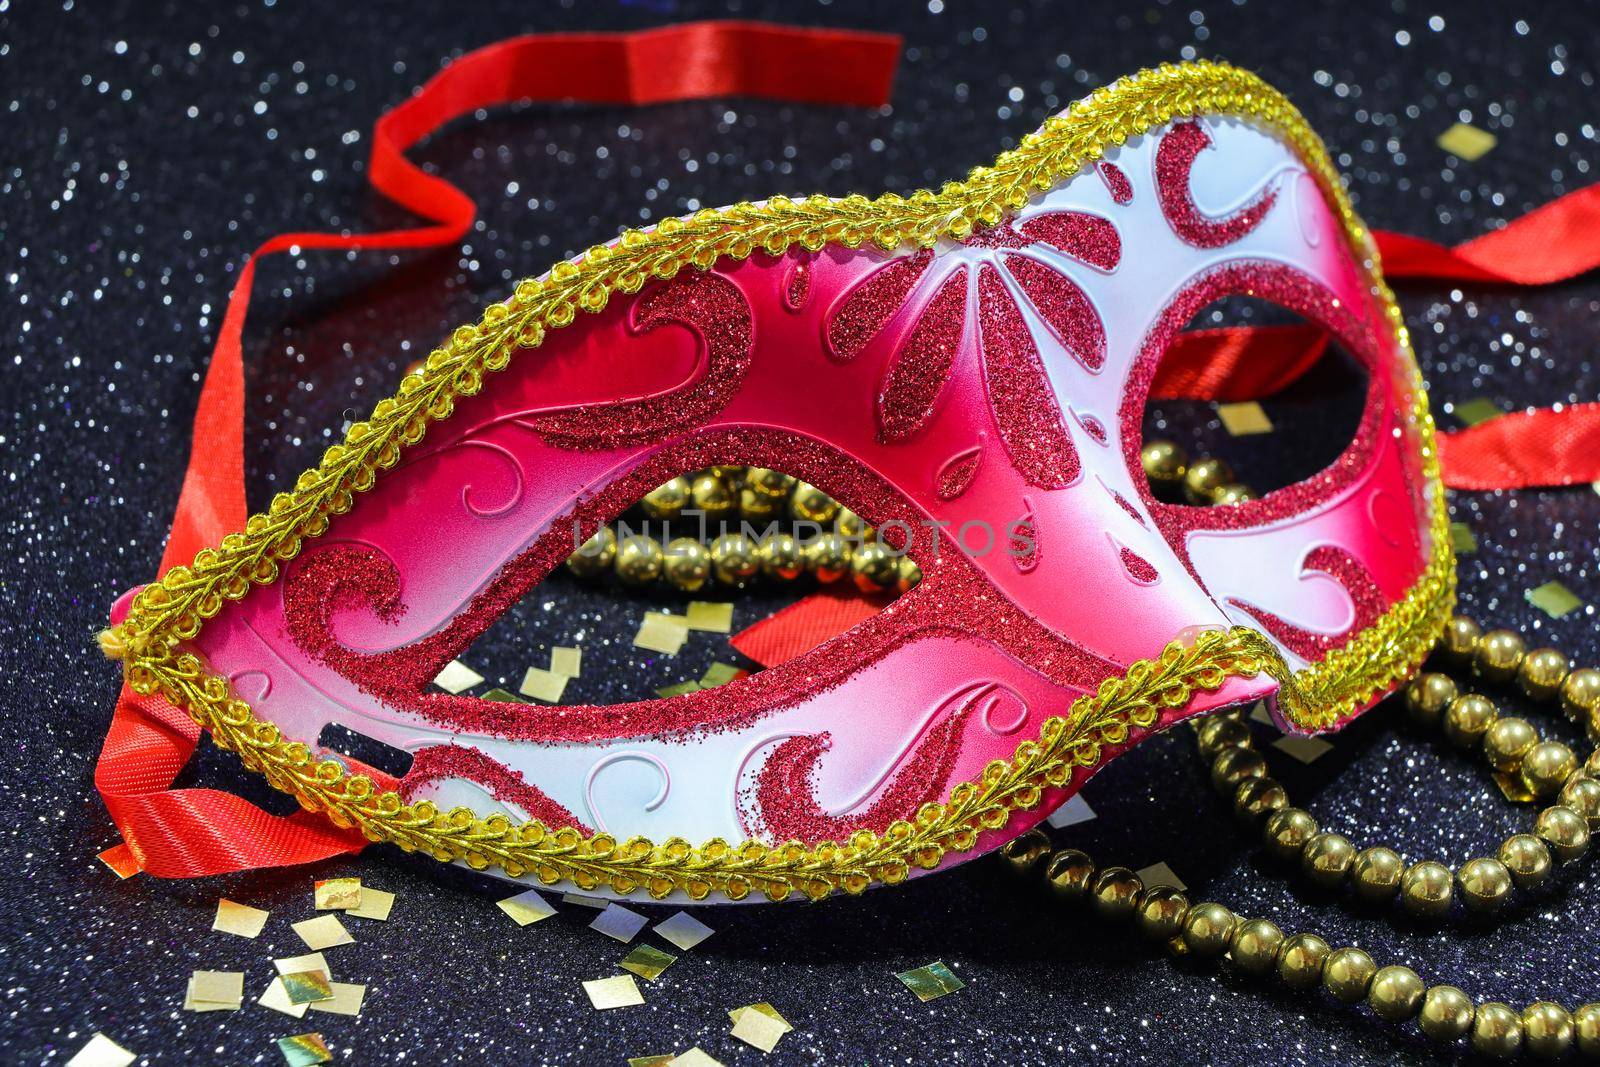 Red Carnival Mask With Gold Beads And Confetti by jjvanginkel